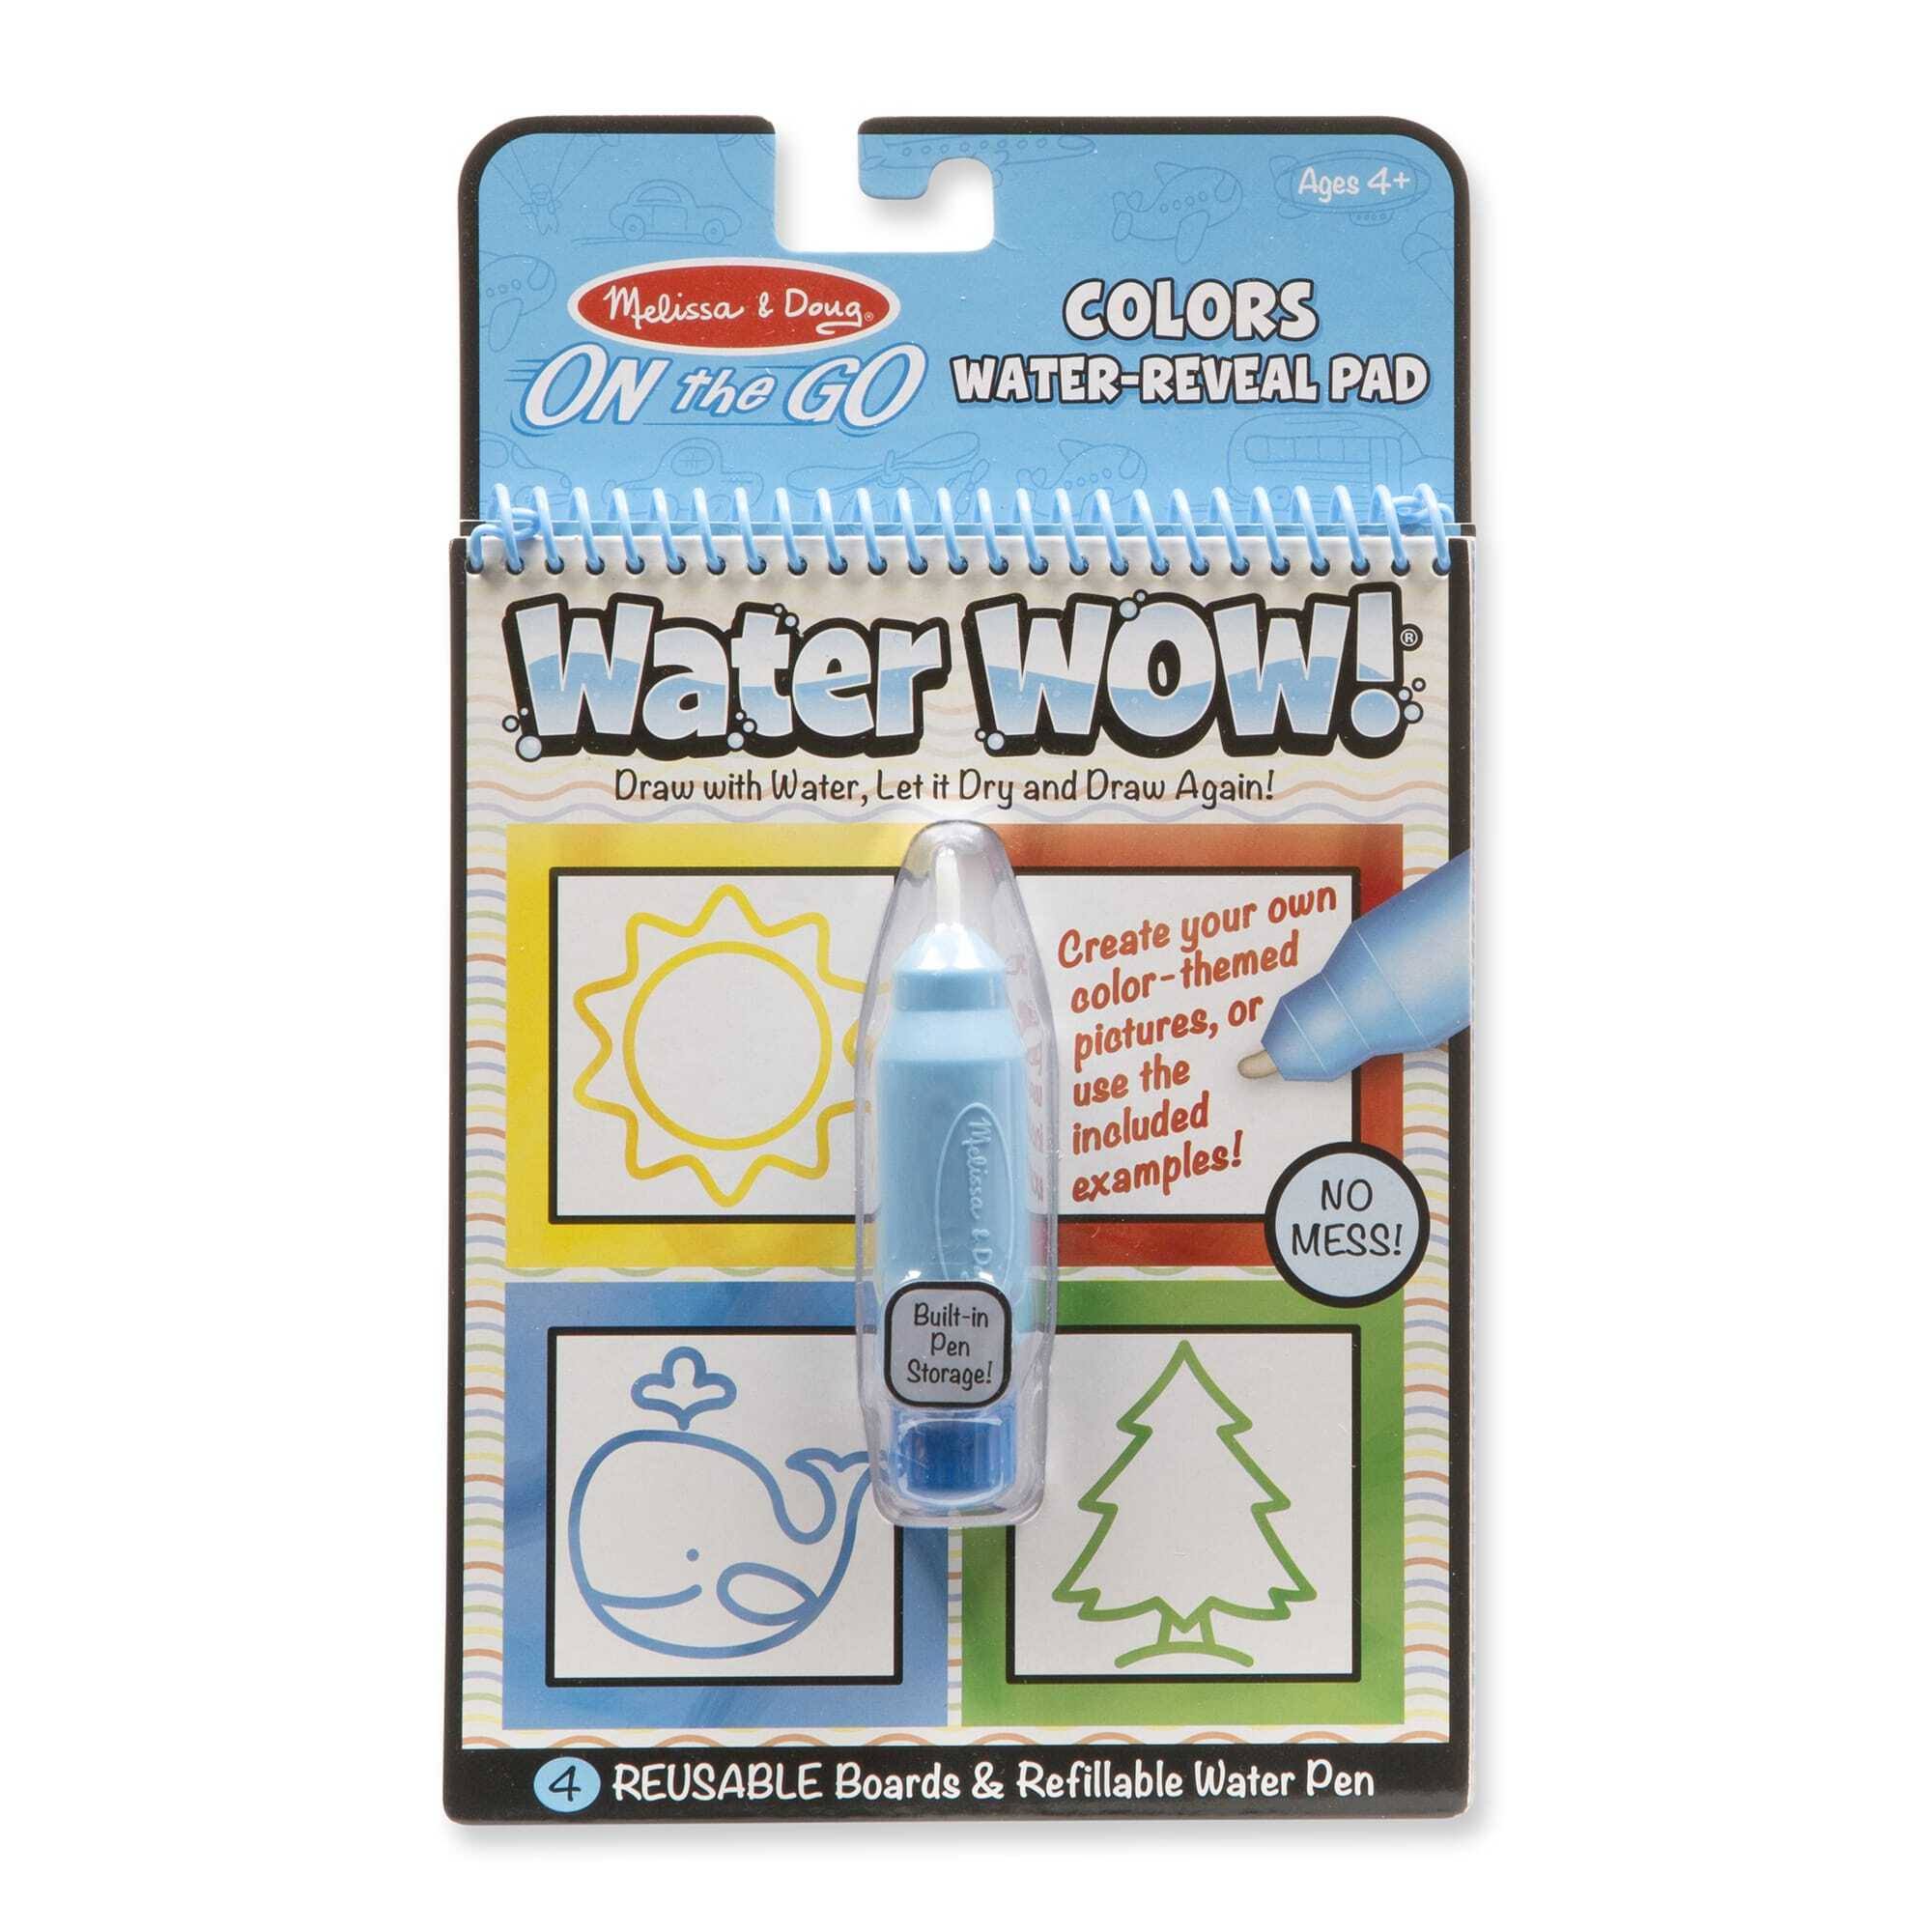 Melissa & Doug On the Go Water Wow Activity Pad, Colors and Shapes